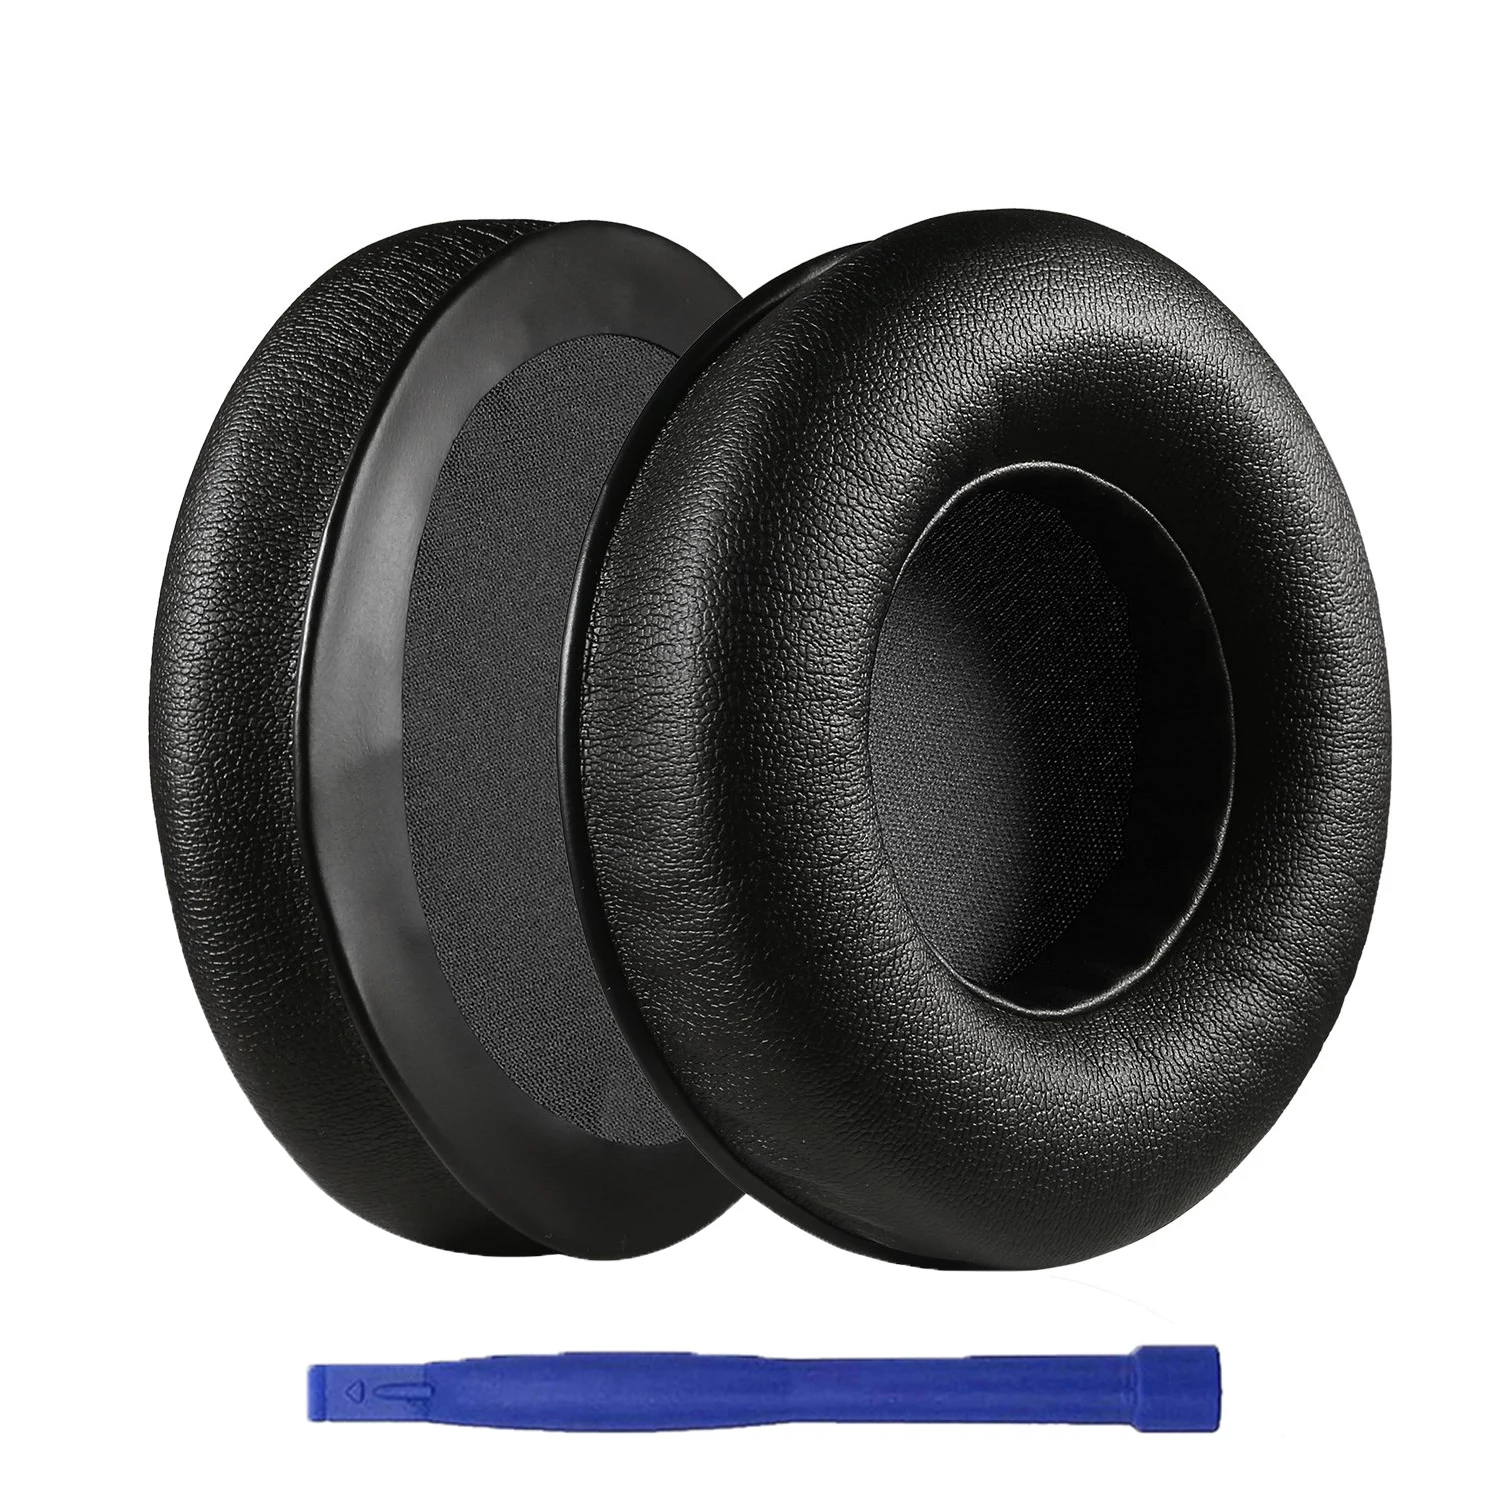 

Replacement Earpads Ear Pads Muffs Cups Cushion Cover Repair Parts for Razer Kraken Pro V1 USB Version 7.1 Headphones Headsets